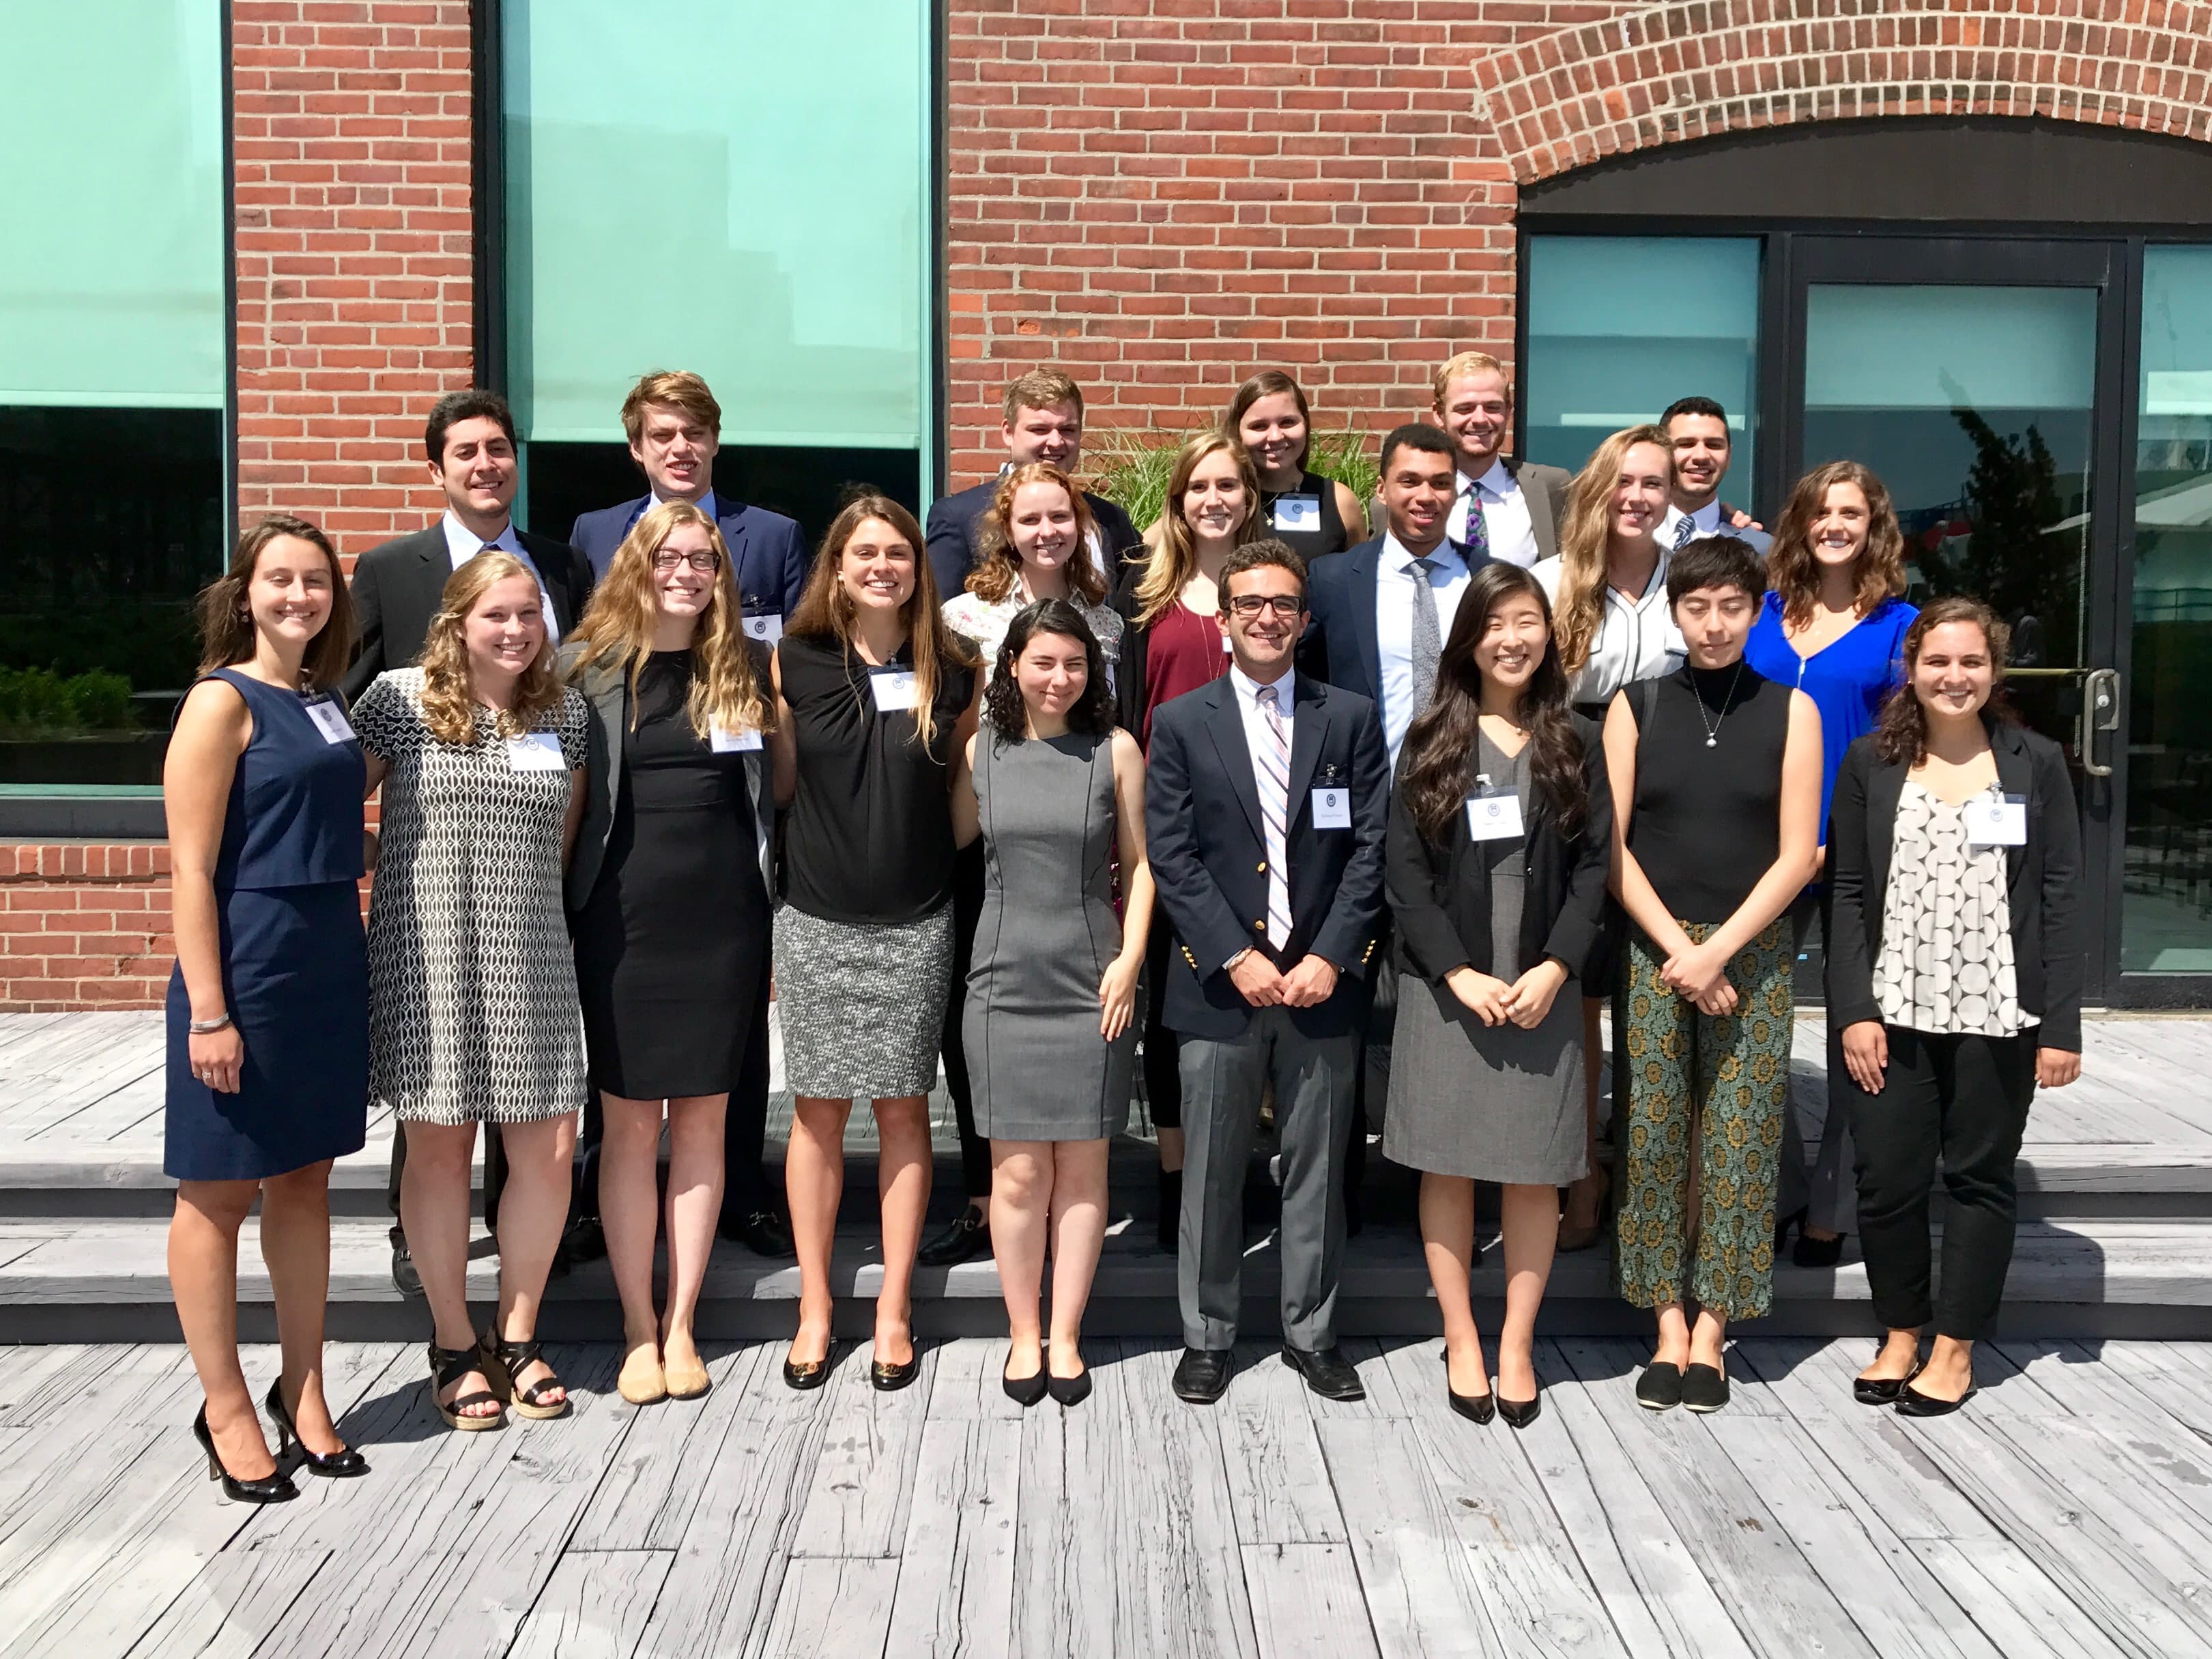 Group photo of interns in business casual clothes smiling outside of a building